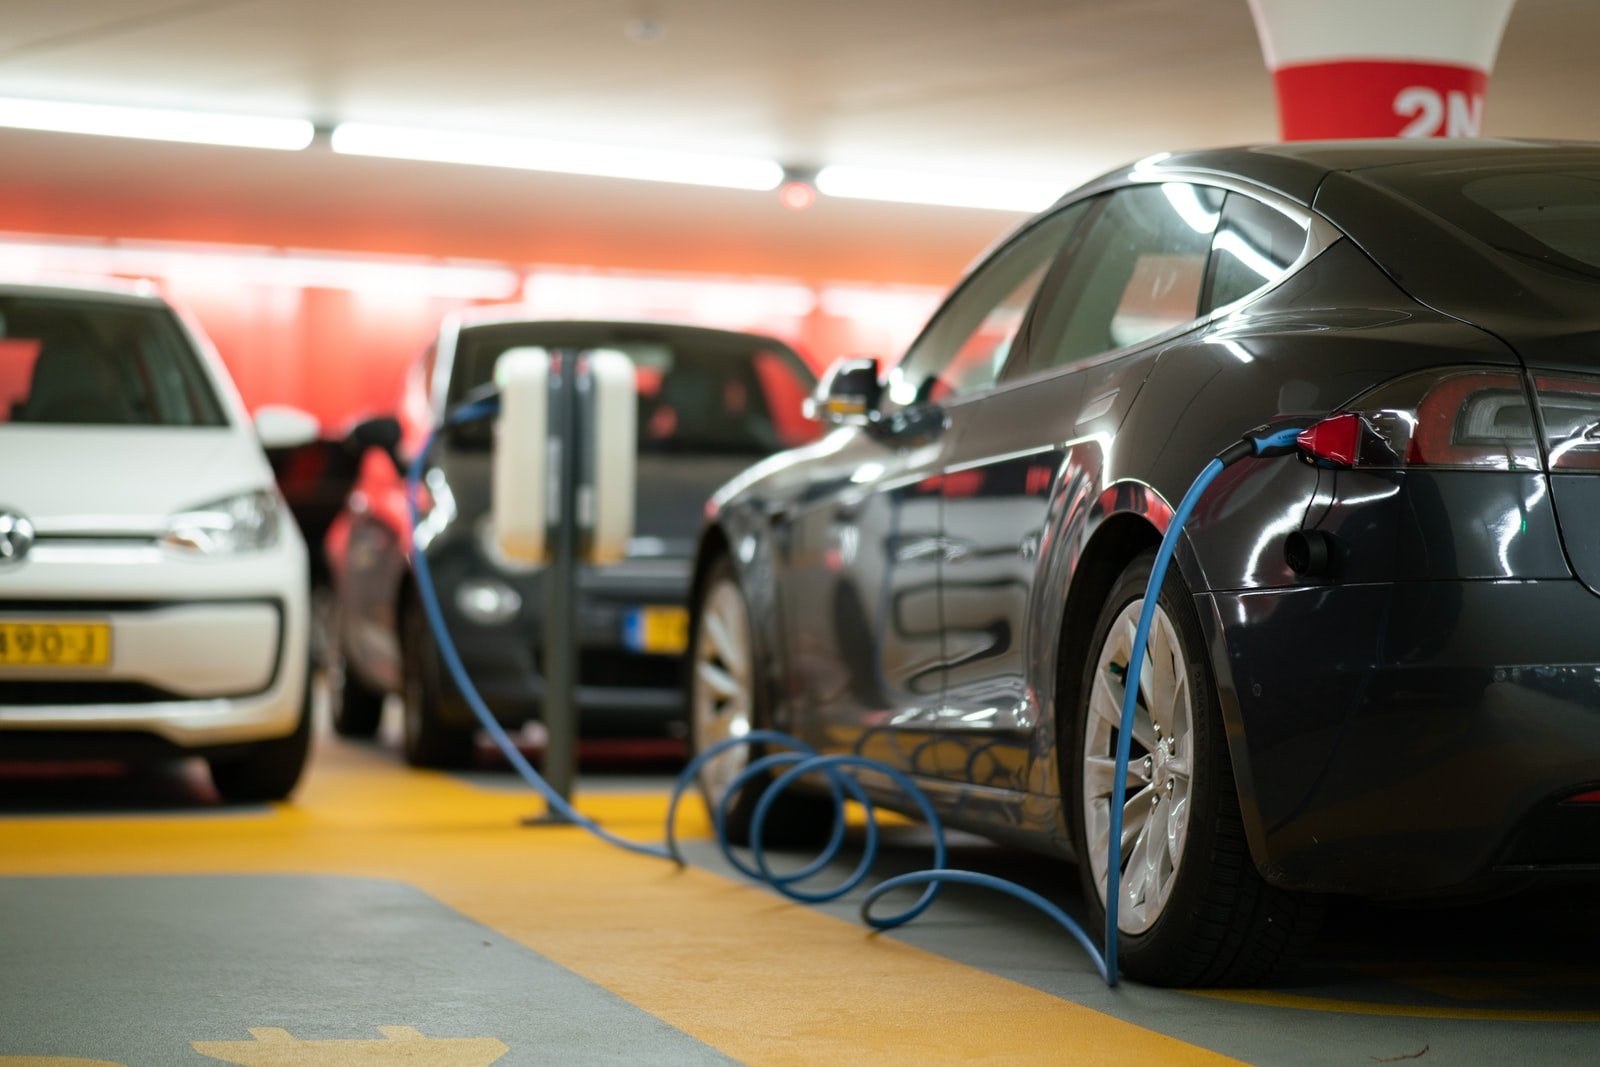 Participate in the new Electric Vehicles survey by EPA and EUR